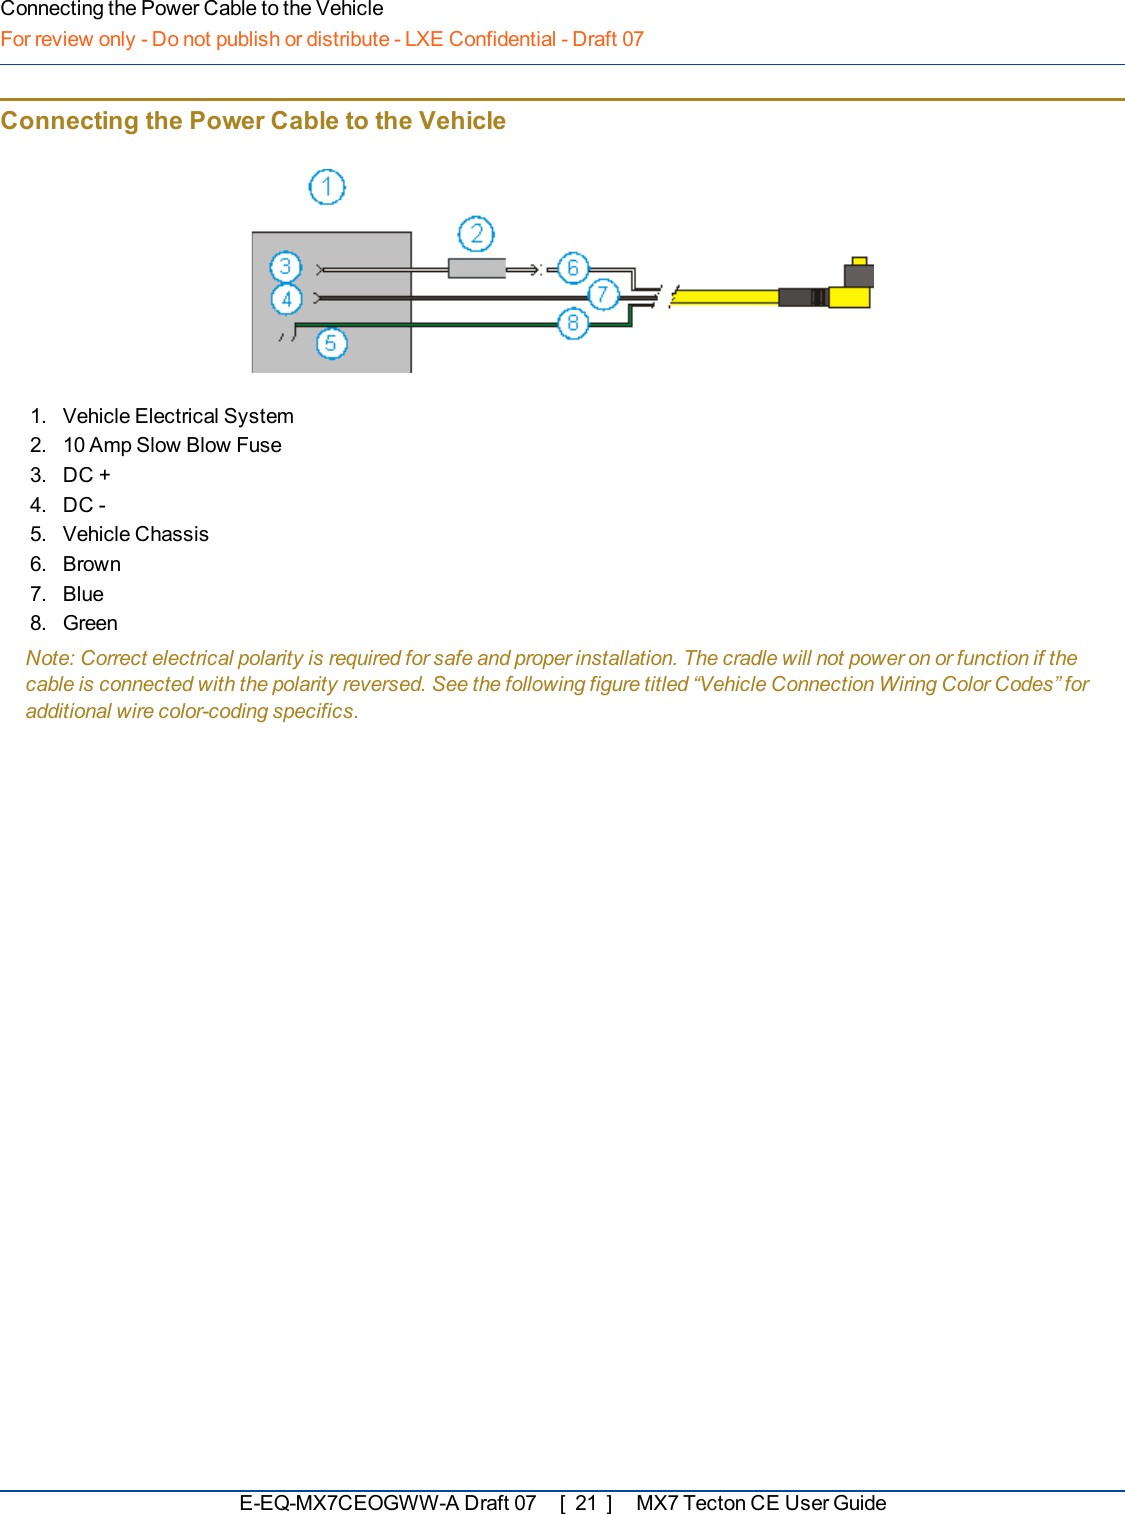 Connecting the Power Cable to the VehicleFor review only - Do not publish or distribute - LXE Confidential - Draft 07Connecting the Power Cable to the Vehicle1. Vehicle Electrical System2. 10 Amp Slow Blow Fuse3. DC +4. DC -5. Vehicle Chassis6. Brown7. Blue8. GreenNote: Correct electrical polarity is required for safe and proper installation. The cradle will not power on or function if thecable is connected with the polarity reversed. See the following figure titled “Vehicle Connection Wiring Color Codes” foradditional wire color-coding specifics.E-EQ-MX7CEOGWW-ADraft 07 [ 21 ] MX7 Tecton CE User Guide